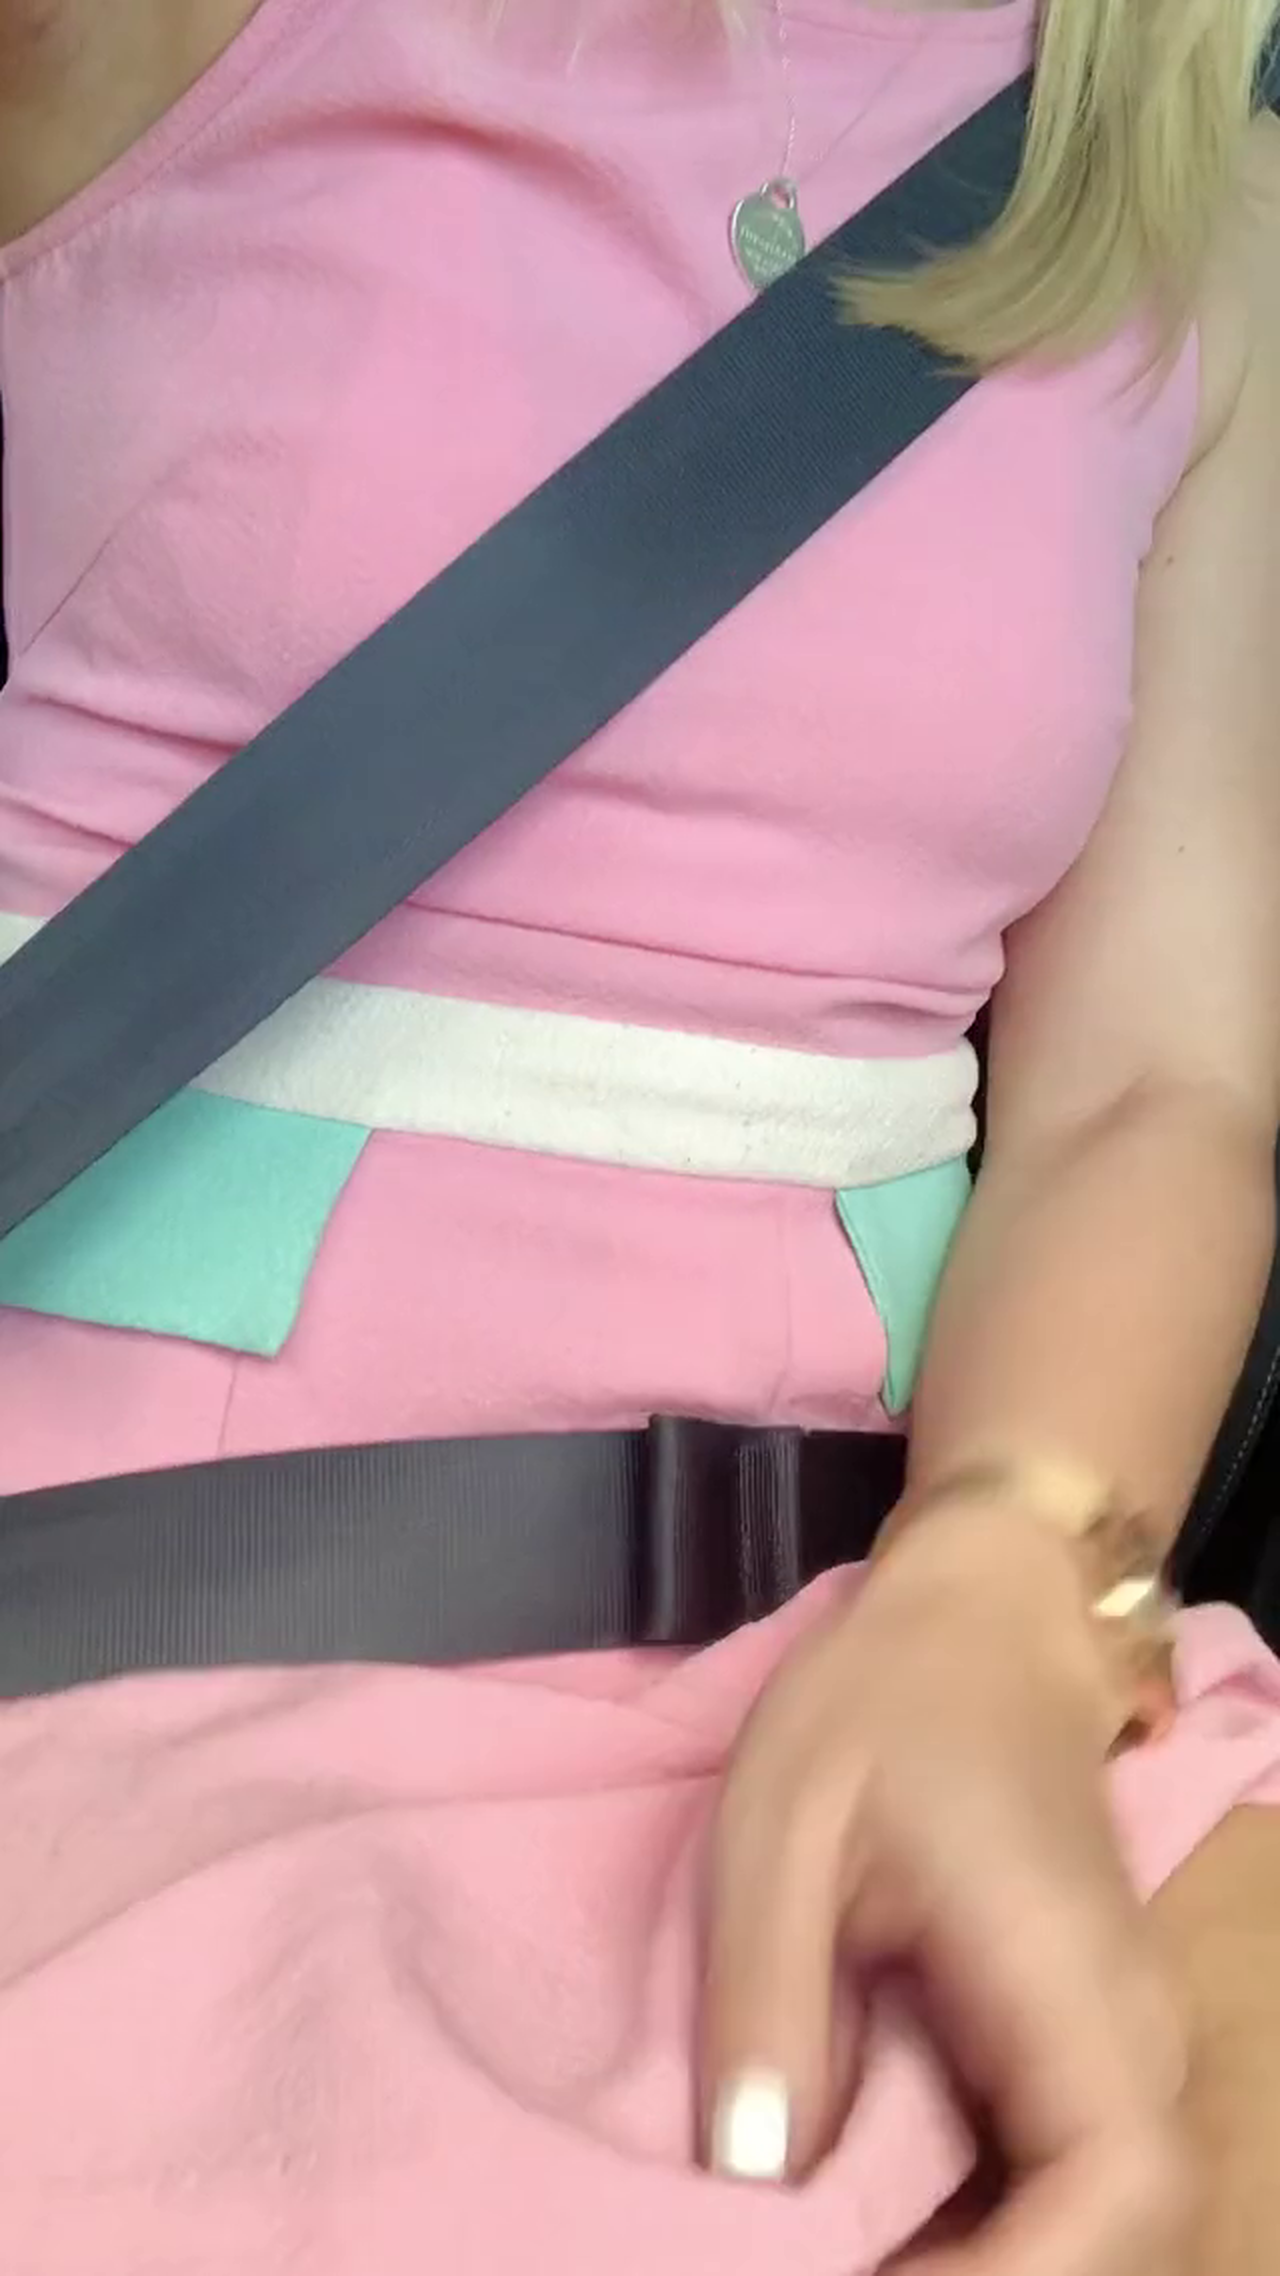 Video by Boyz W/ Lewd with the username @boyzwithlewd,  January 12, 2021 at 10:45 AM. The post is about the topic Teen and the text says 'Would you eat my little pussy in the backseat?'